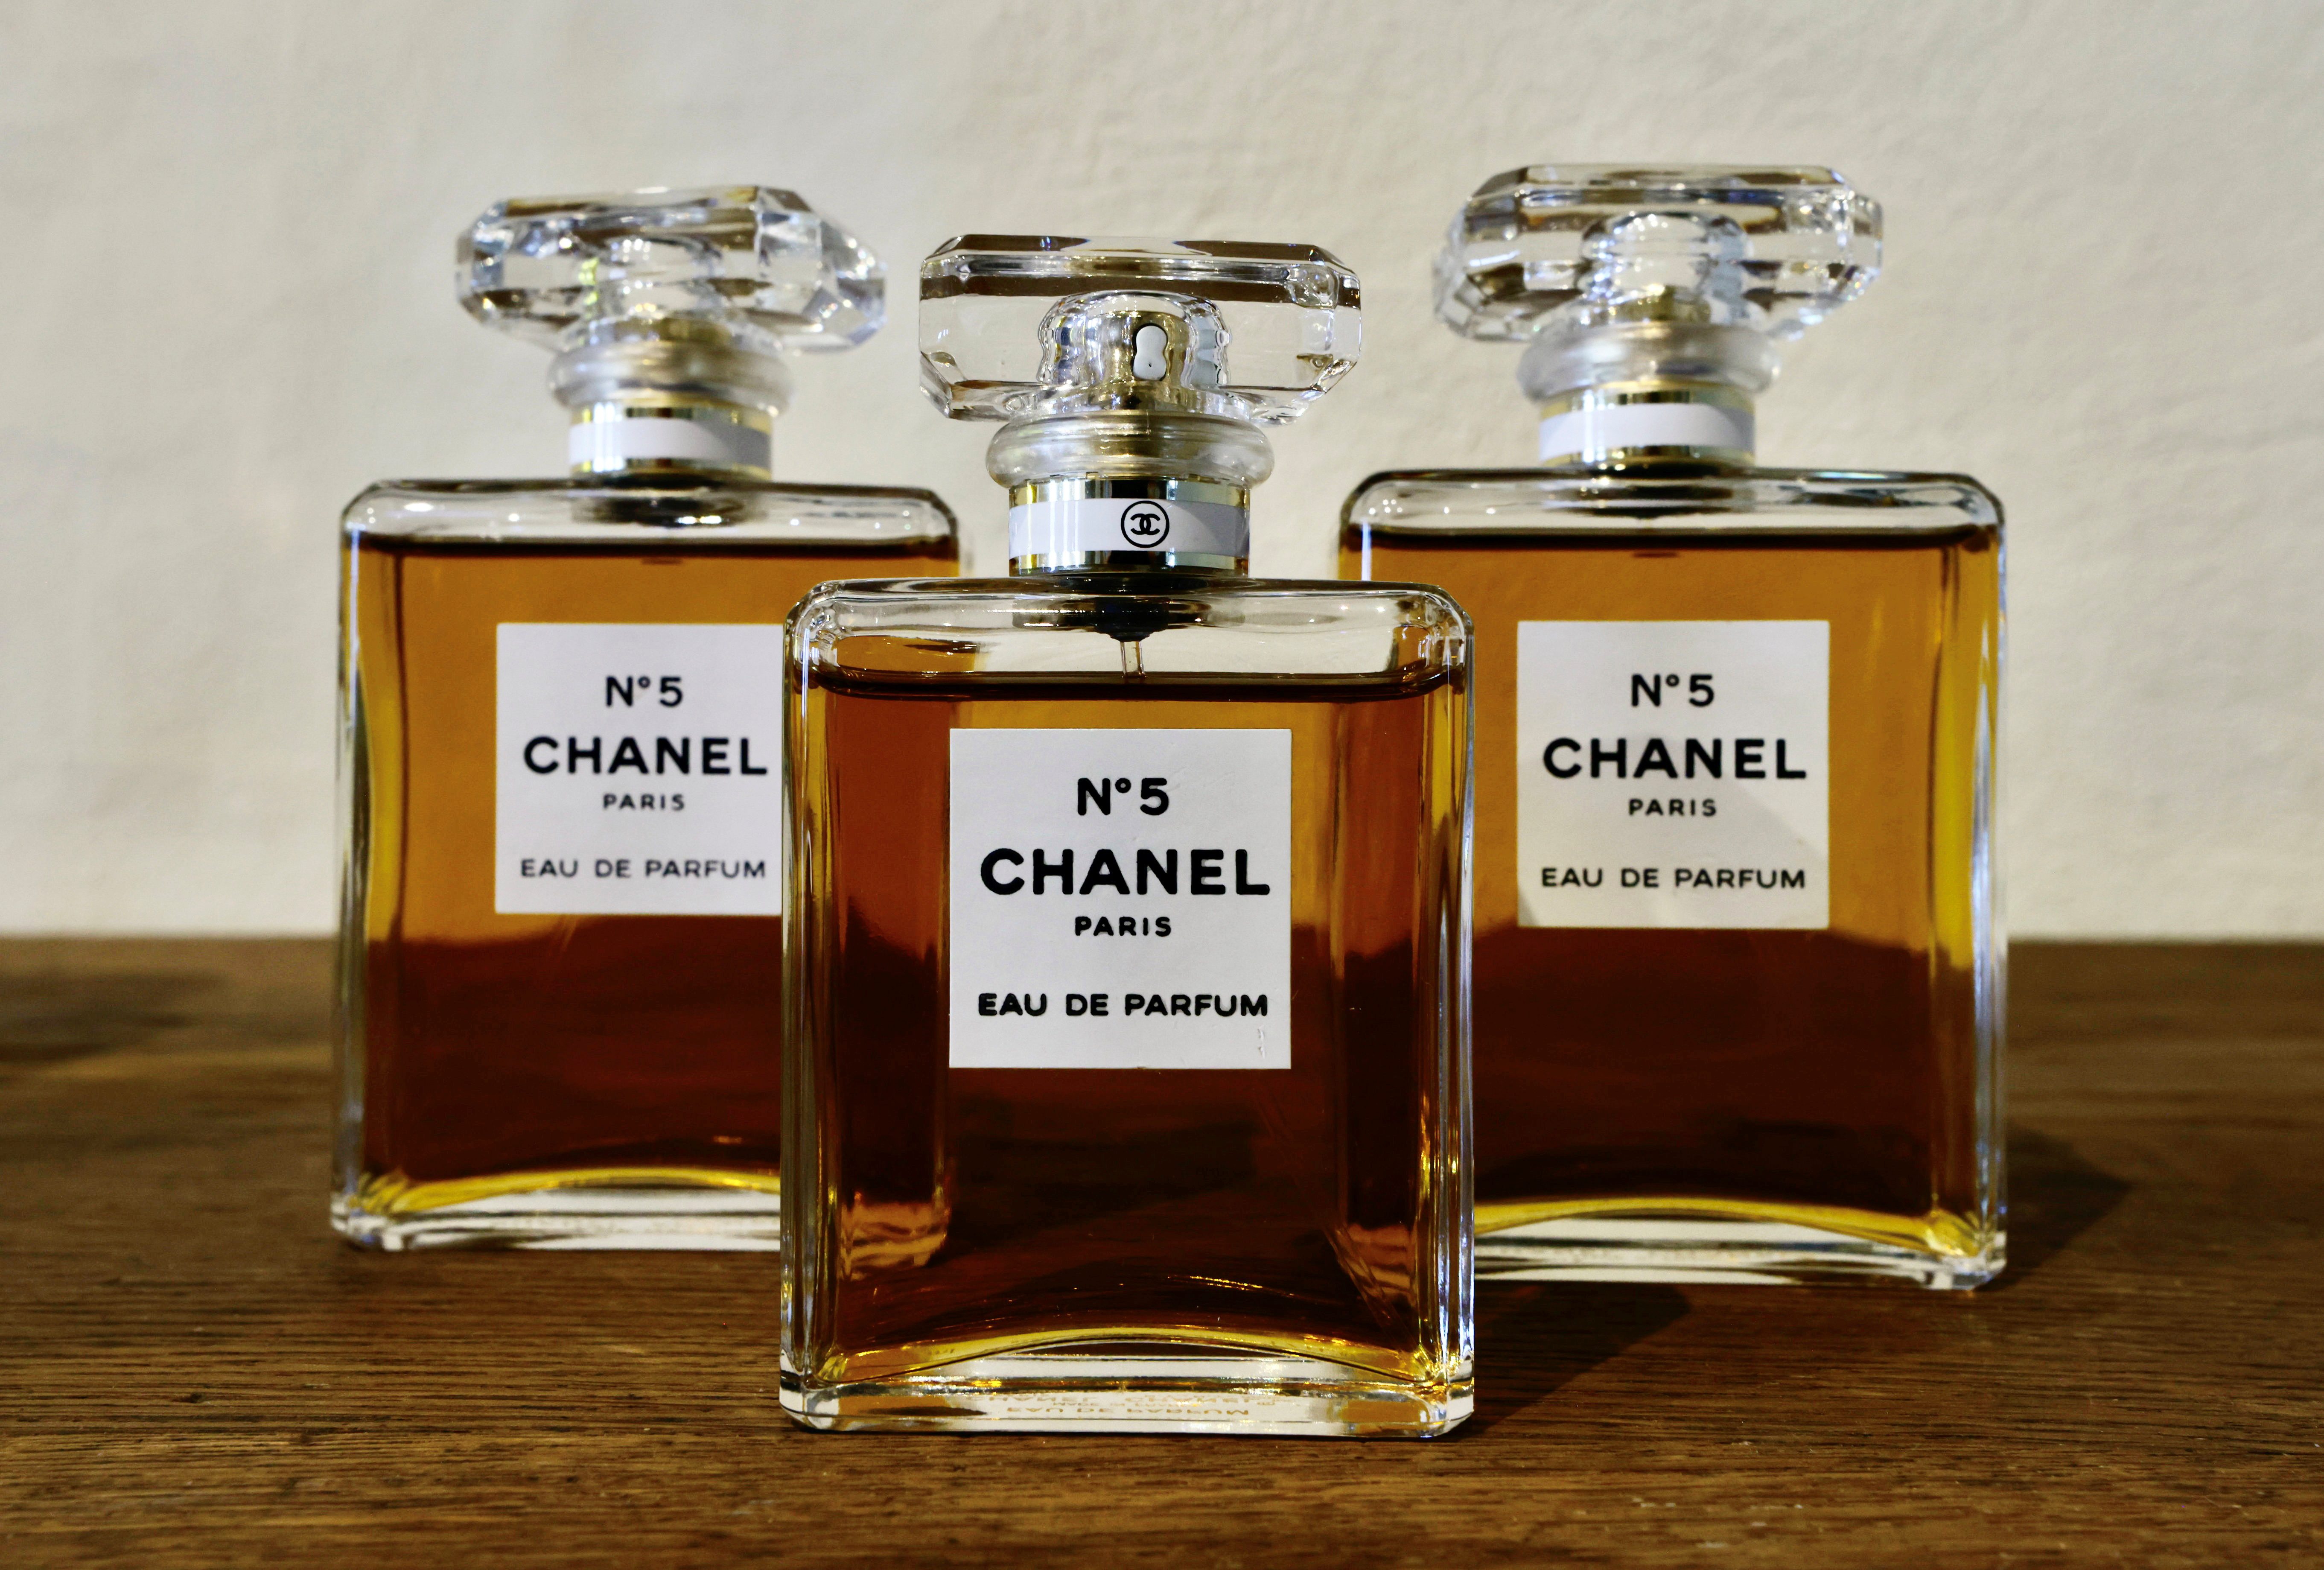 Chanel buys more jasmine fields to safeguard famous No. 5 perfume